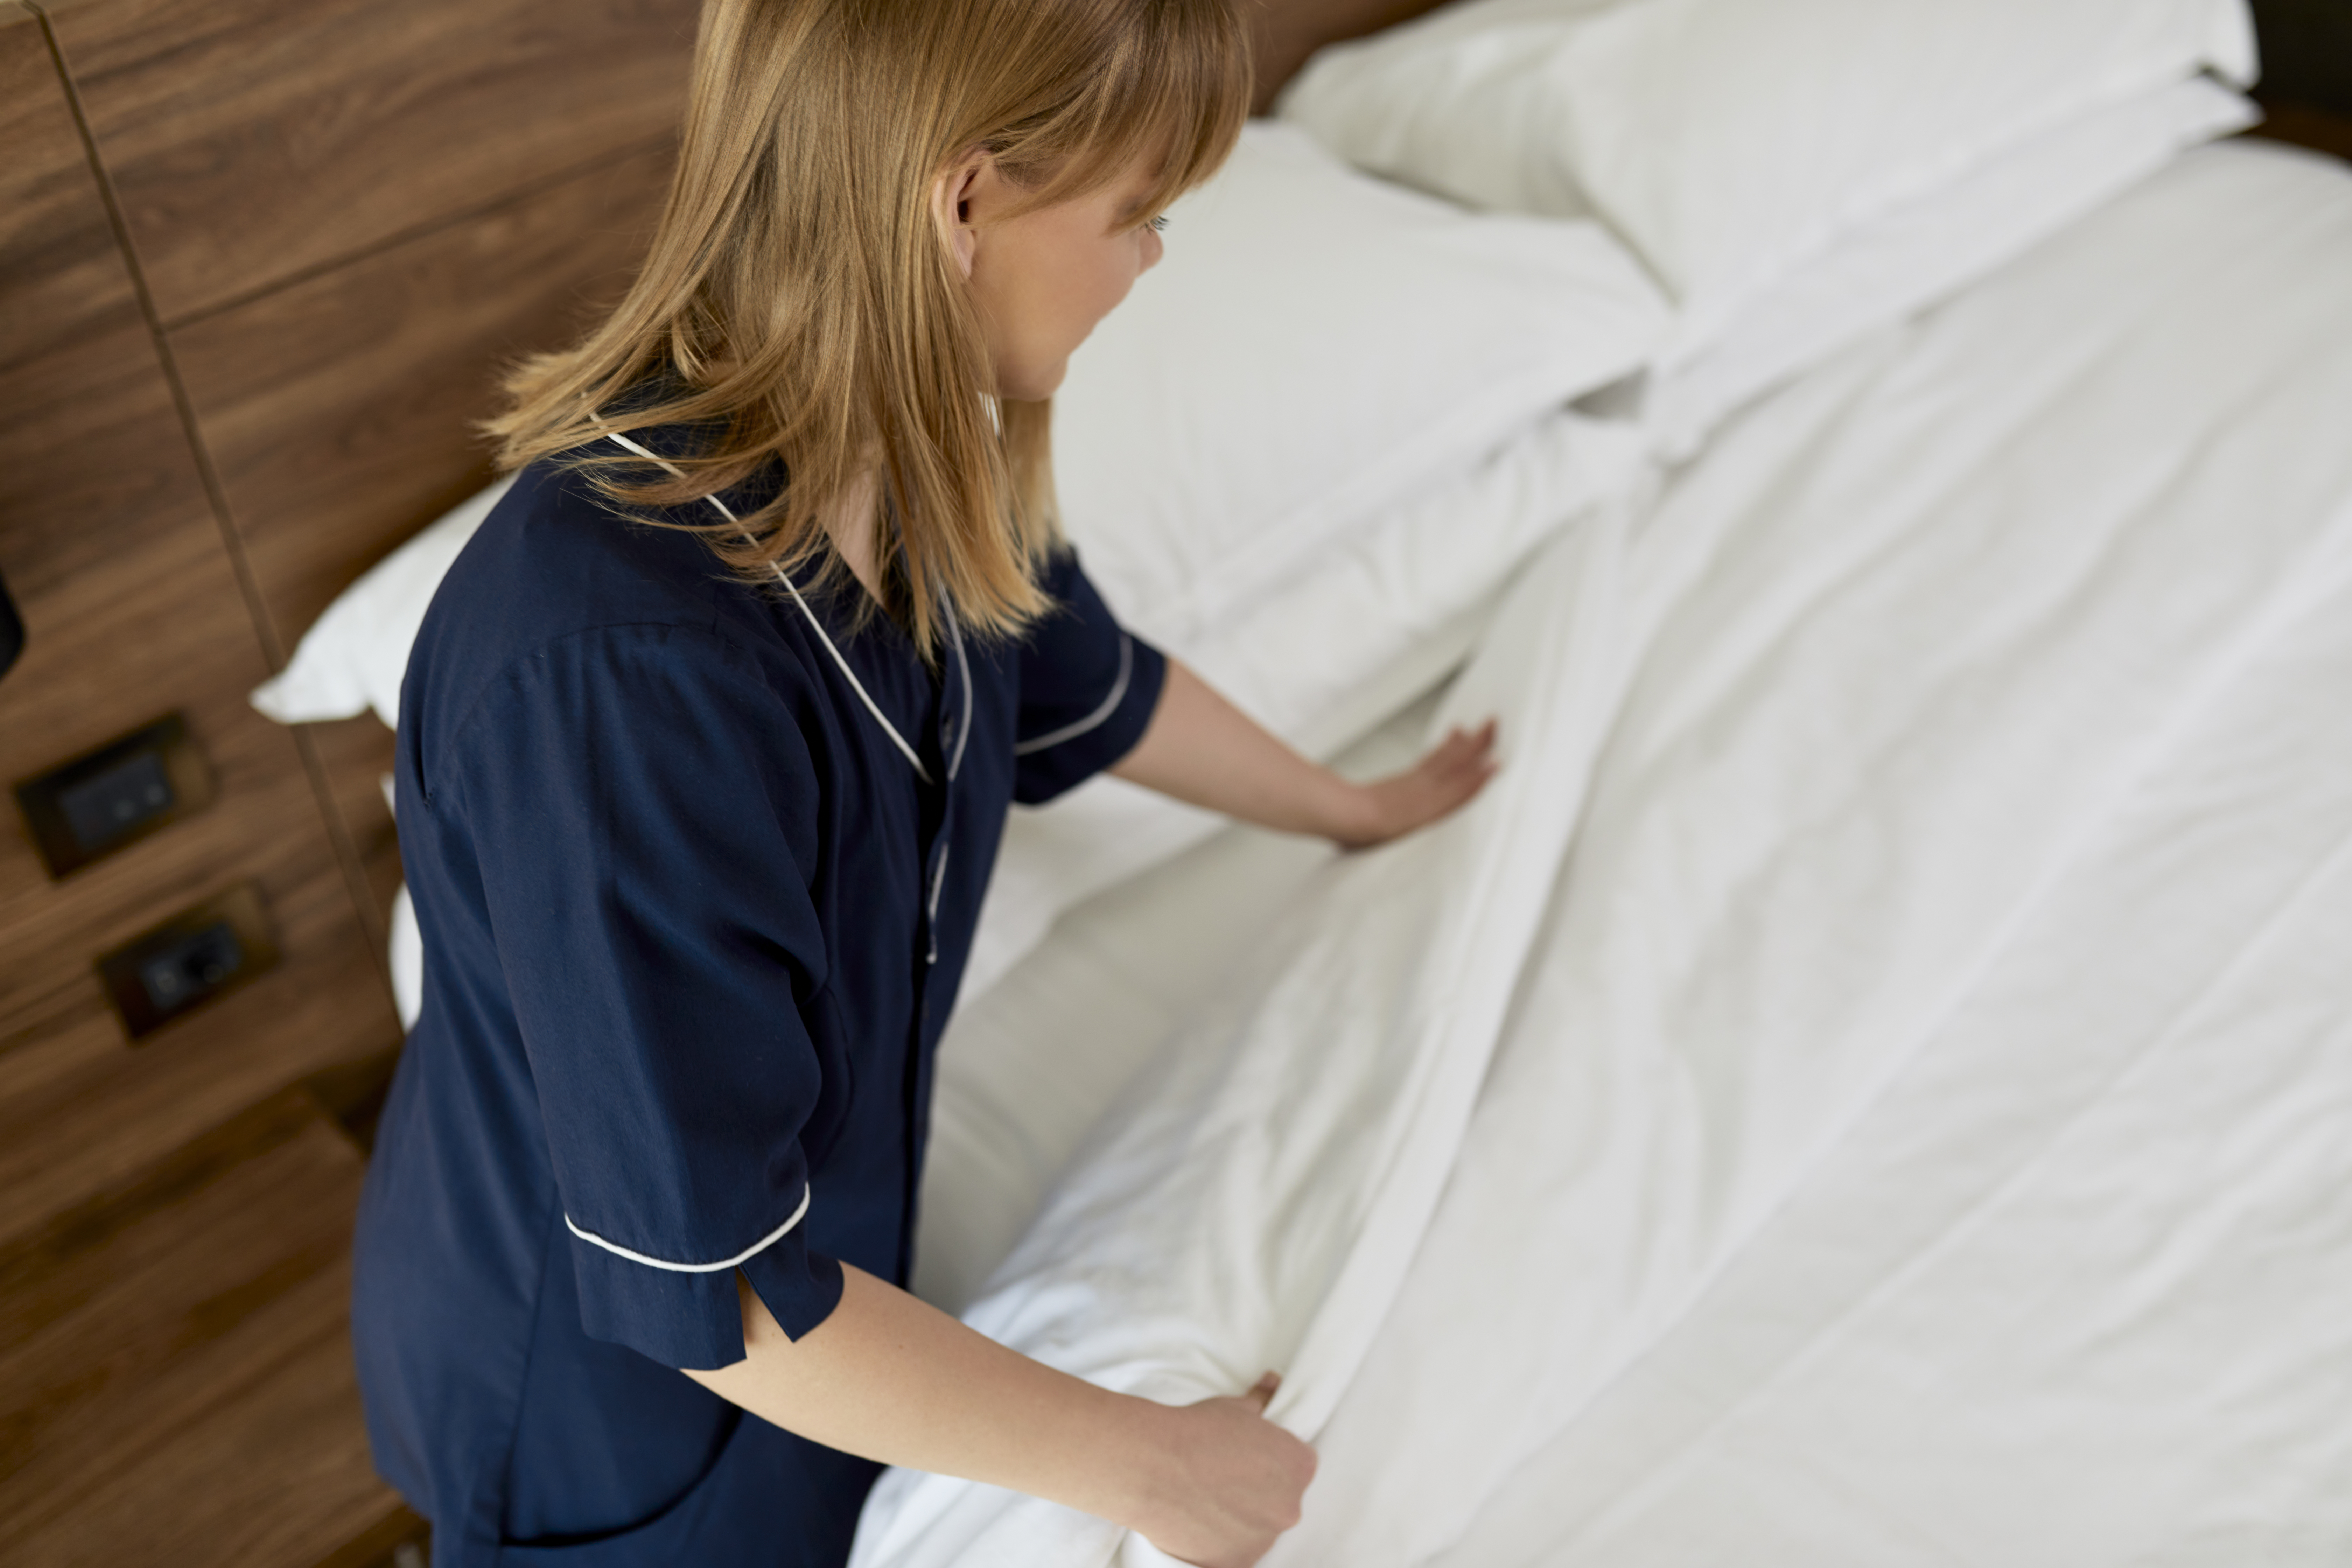 Hotel maid makes the bed | Source: Getty Images